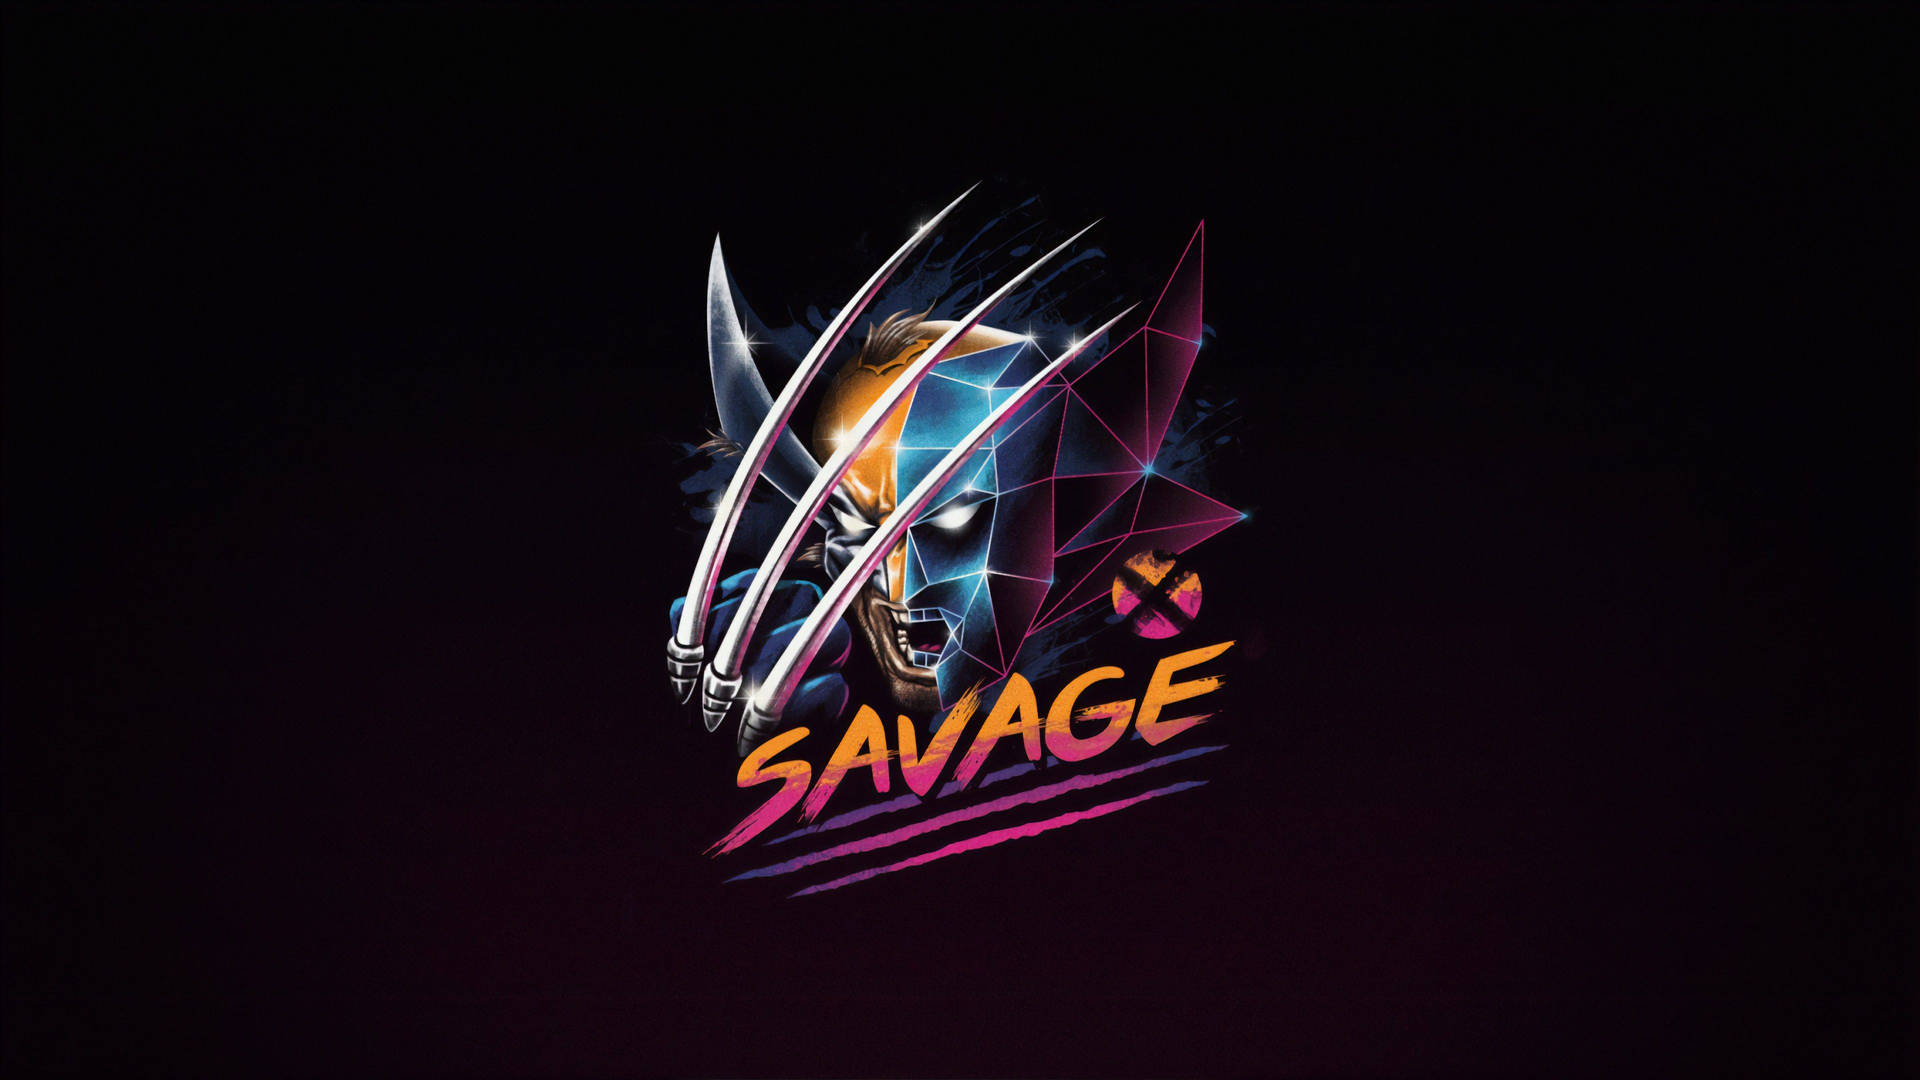 Savage Pictures Wallpaper